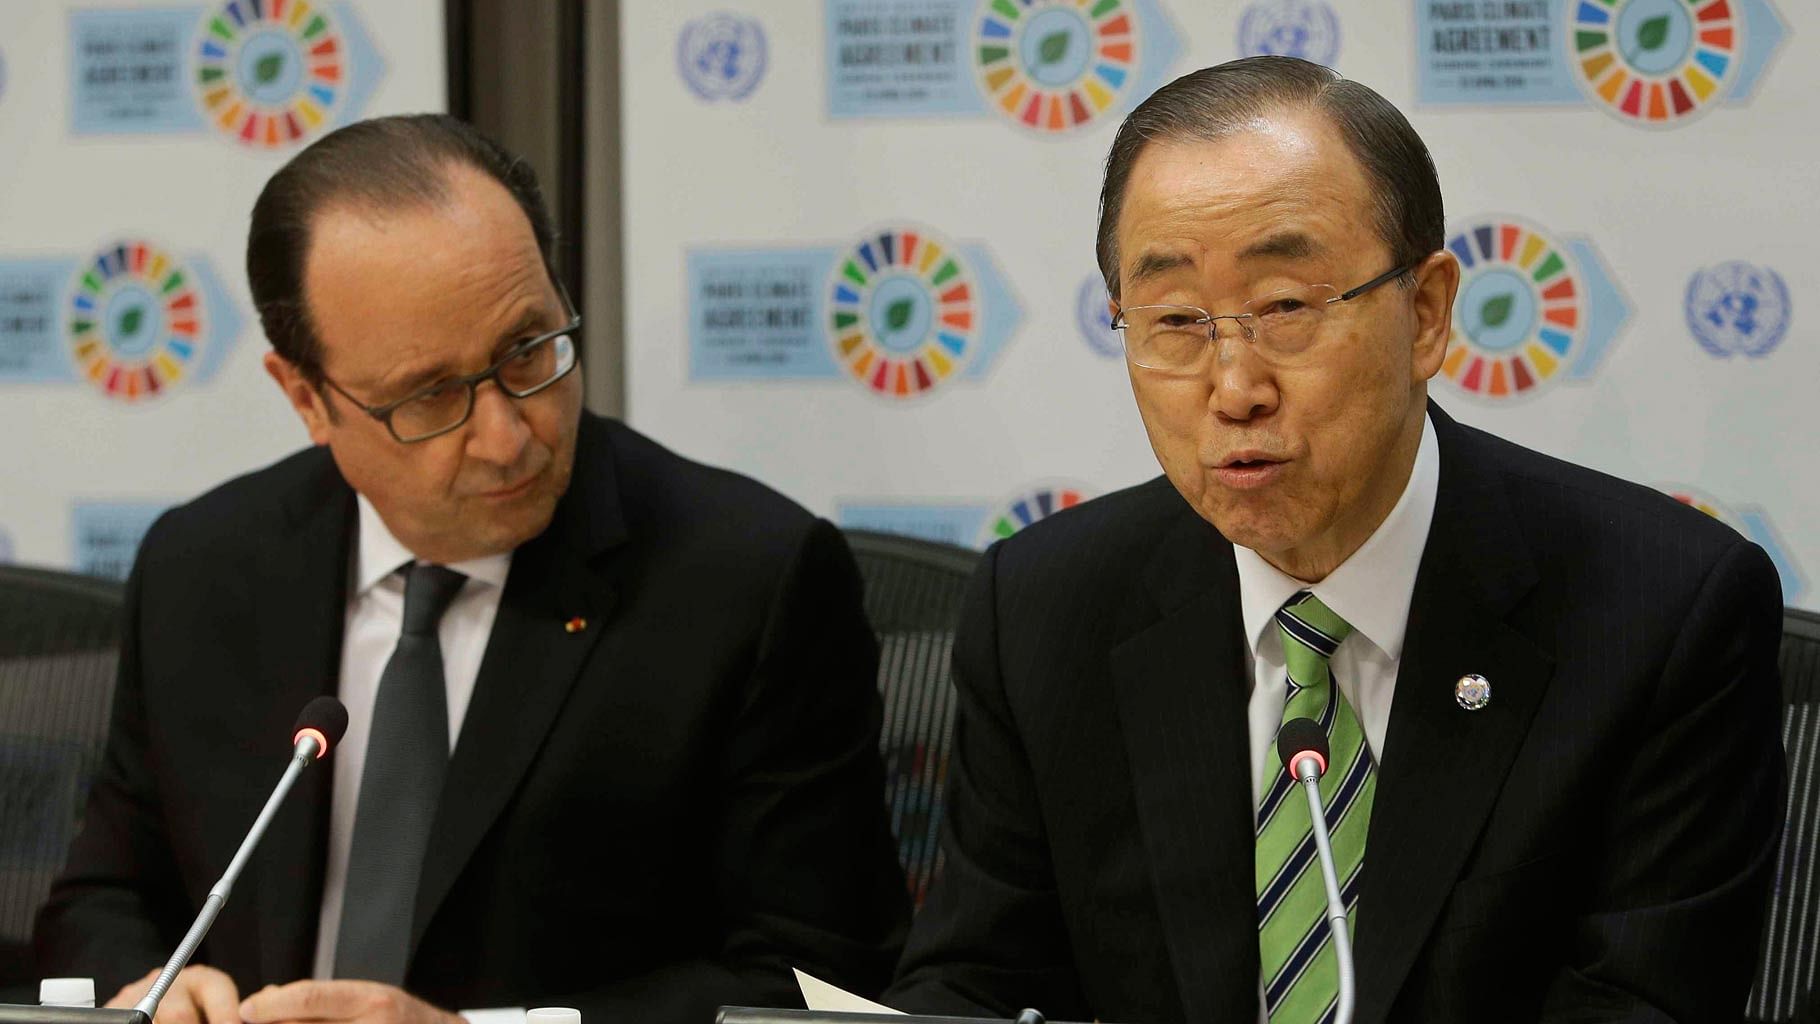 Francois Hollande, President of France( left), listens as Secretary General Ban Ki-moon, (right), speaks during a news conference Friday at the United Nations headquarters. (Photo: AP)